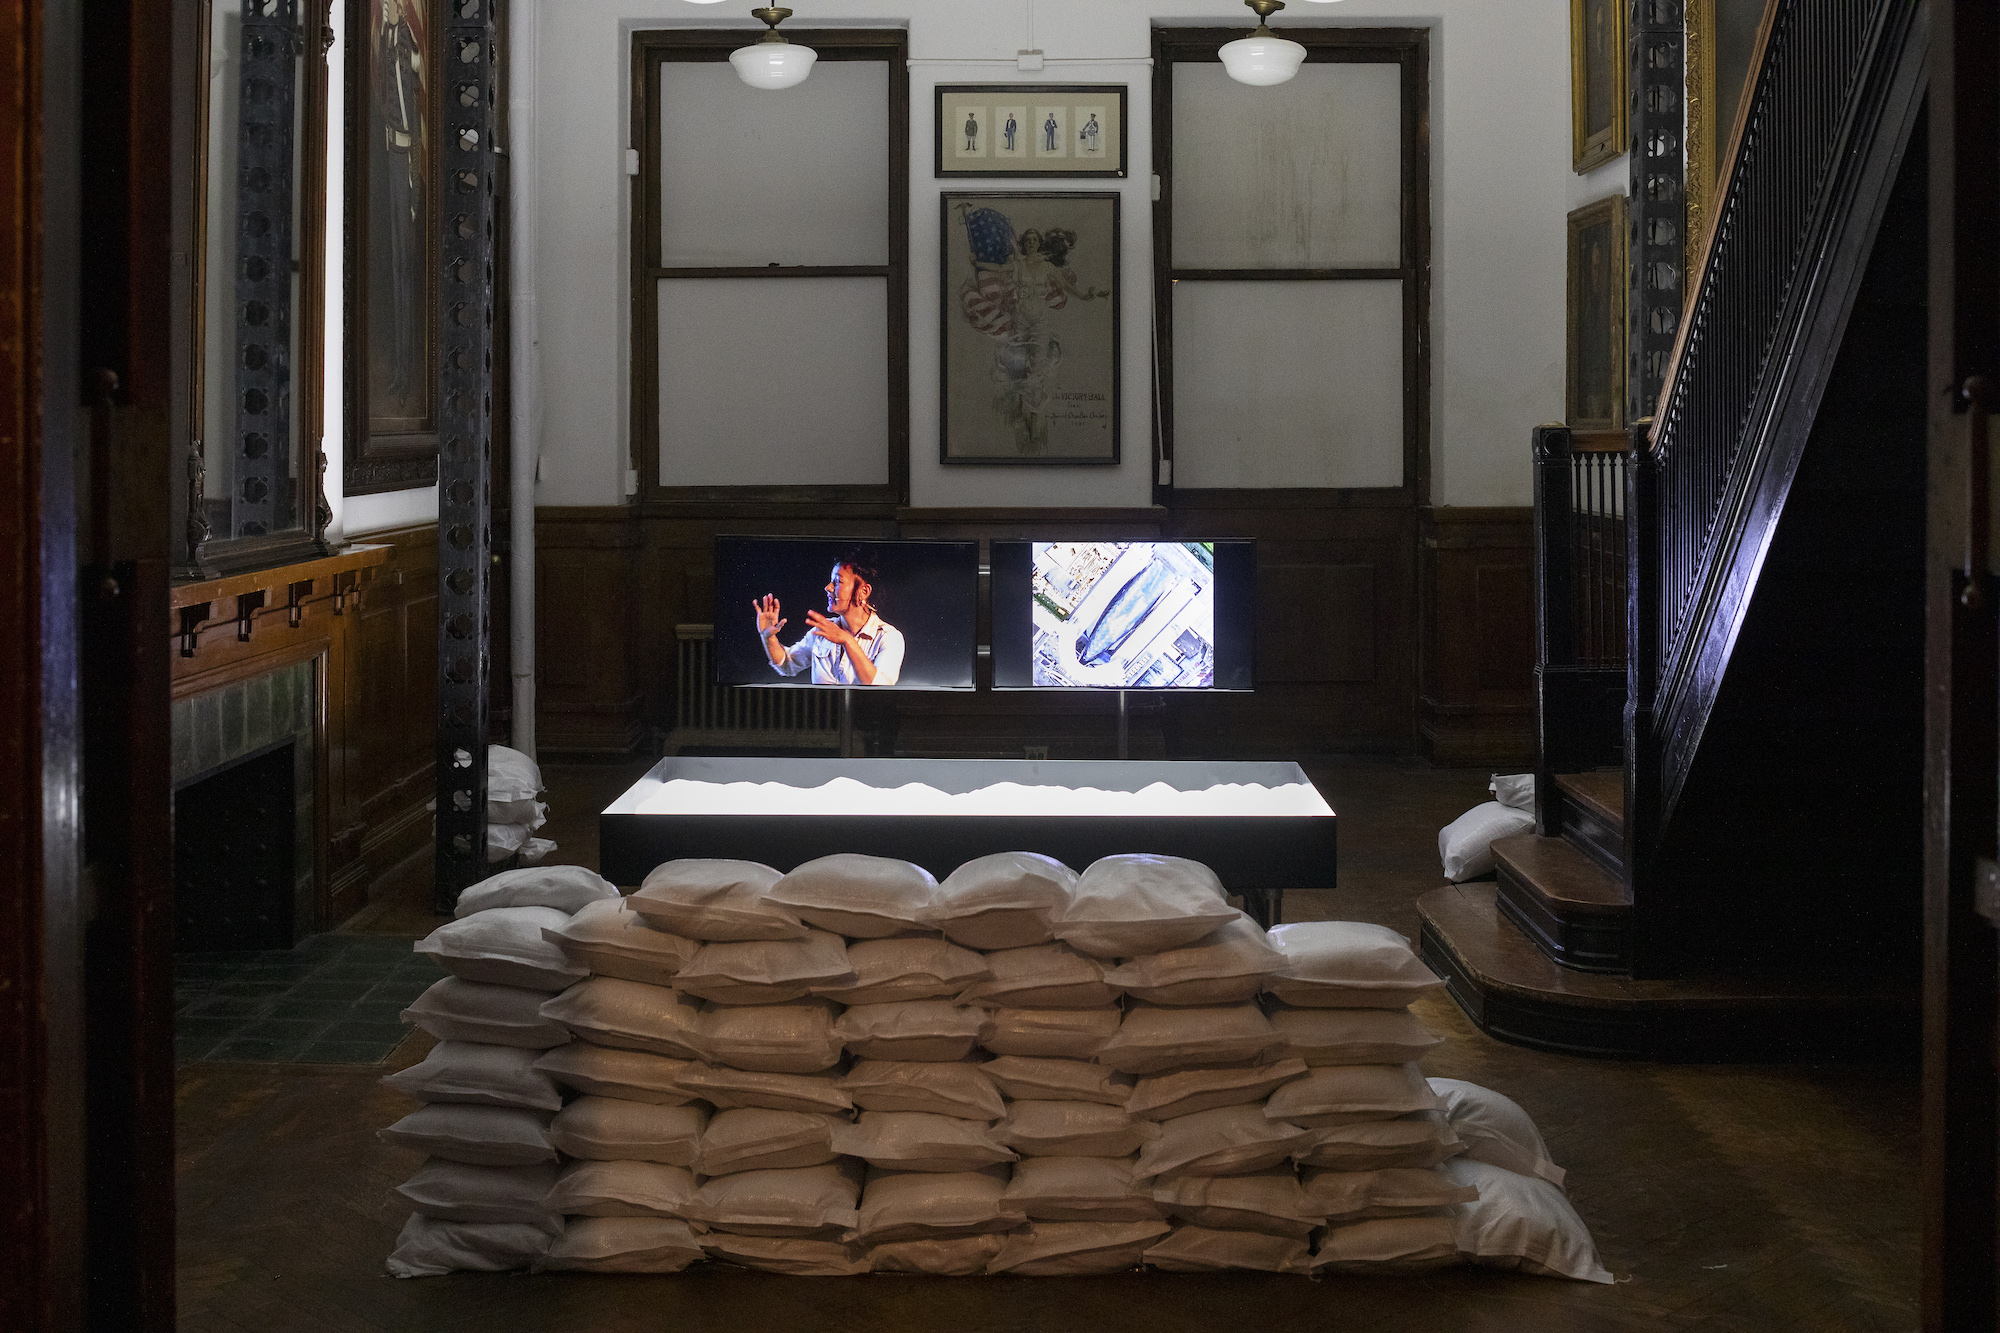 An image of a screen with sandbags stacked in front of it.